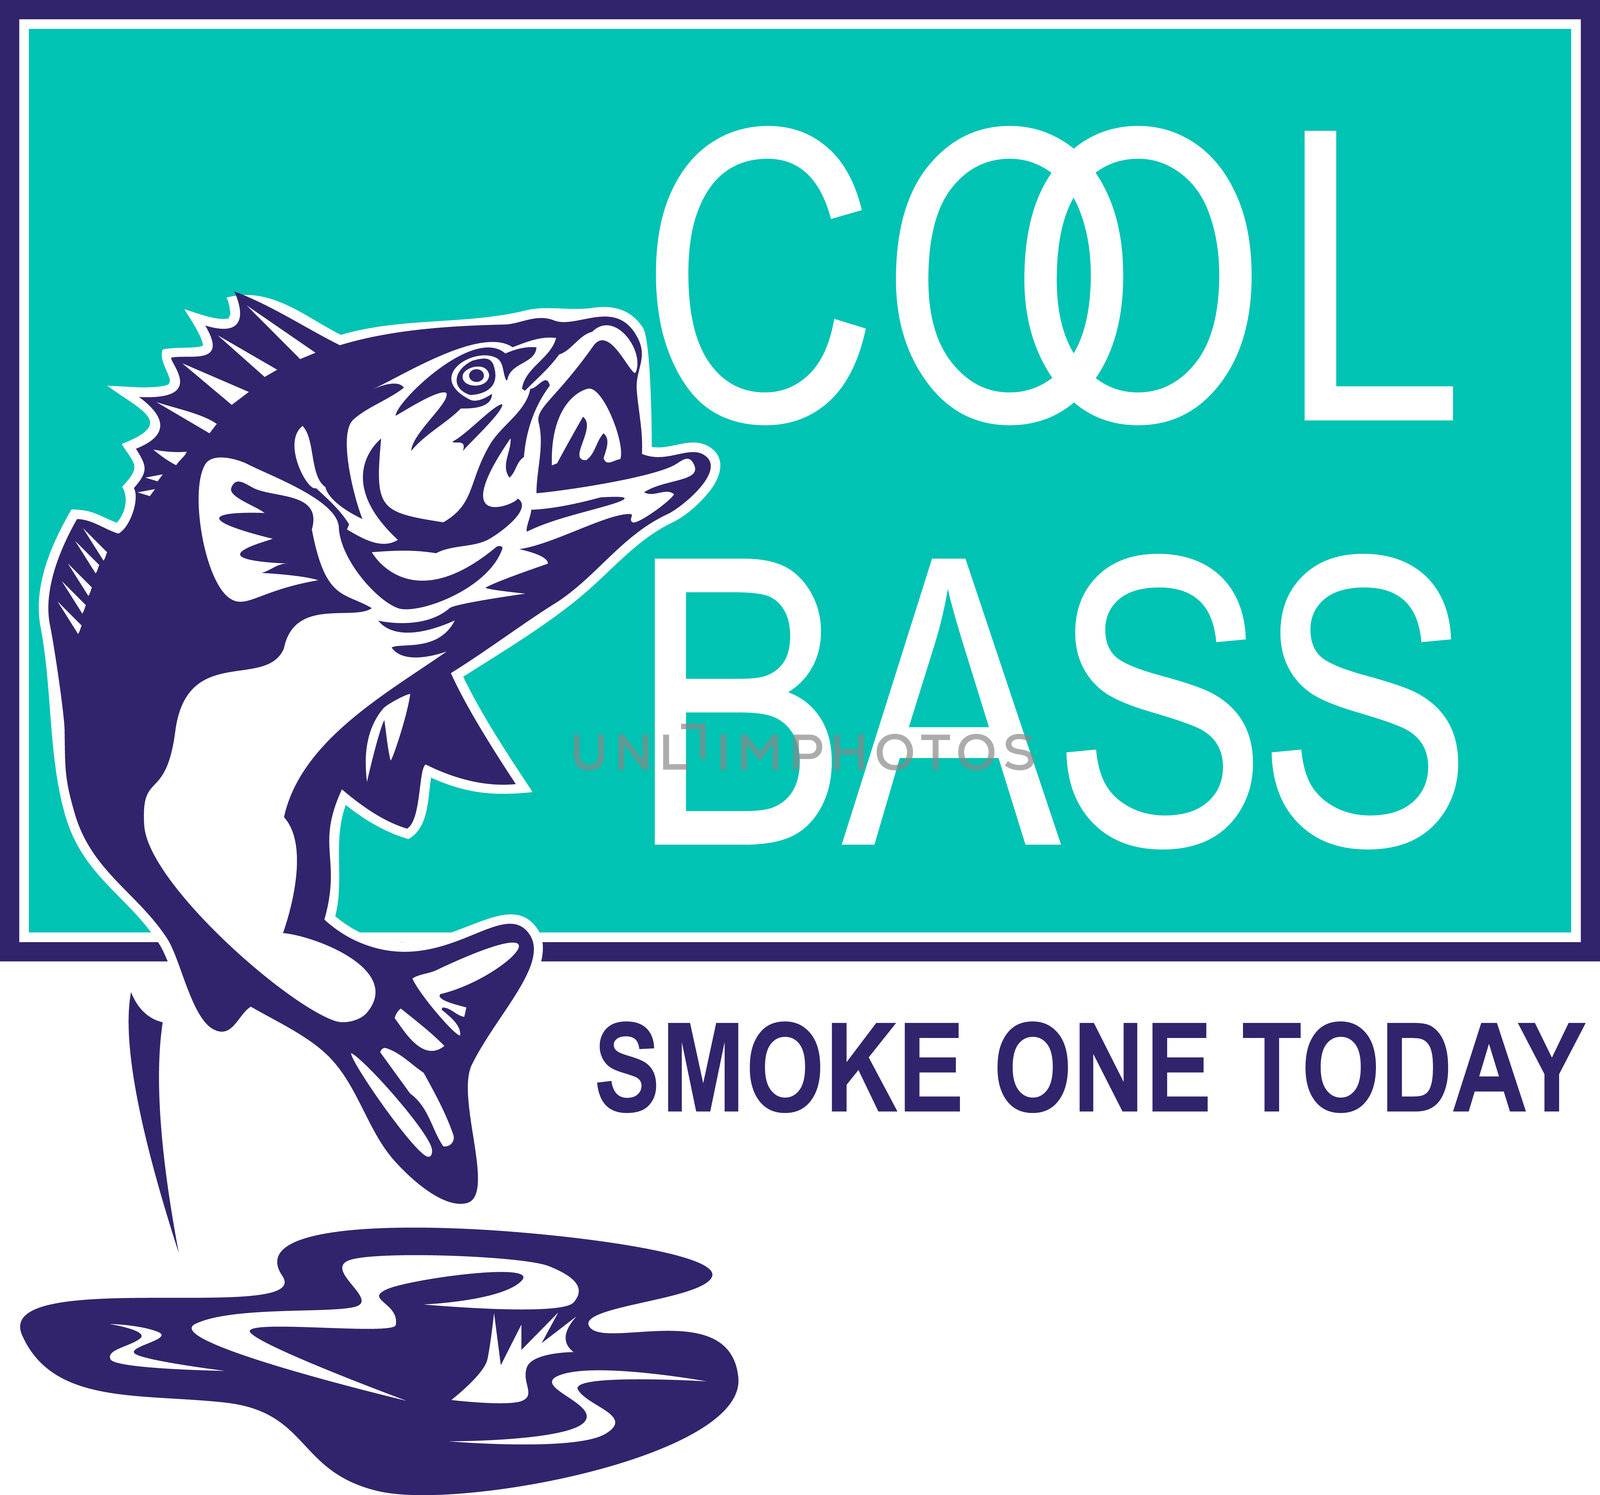 illustration of a largemouth bass jumping with words "cool bass" and "smoke one today" done in retro style